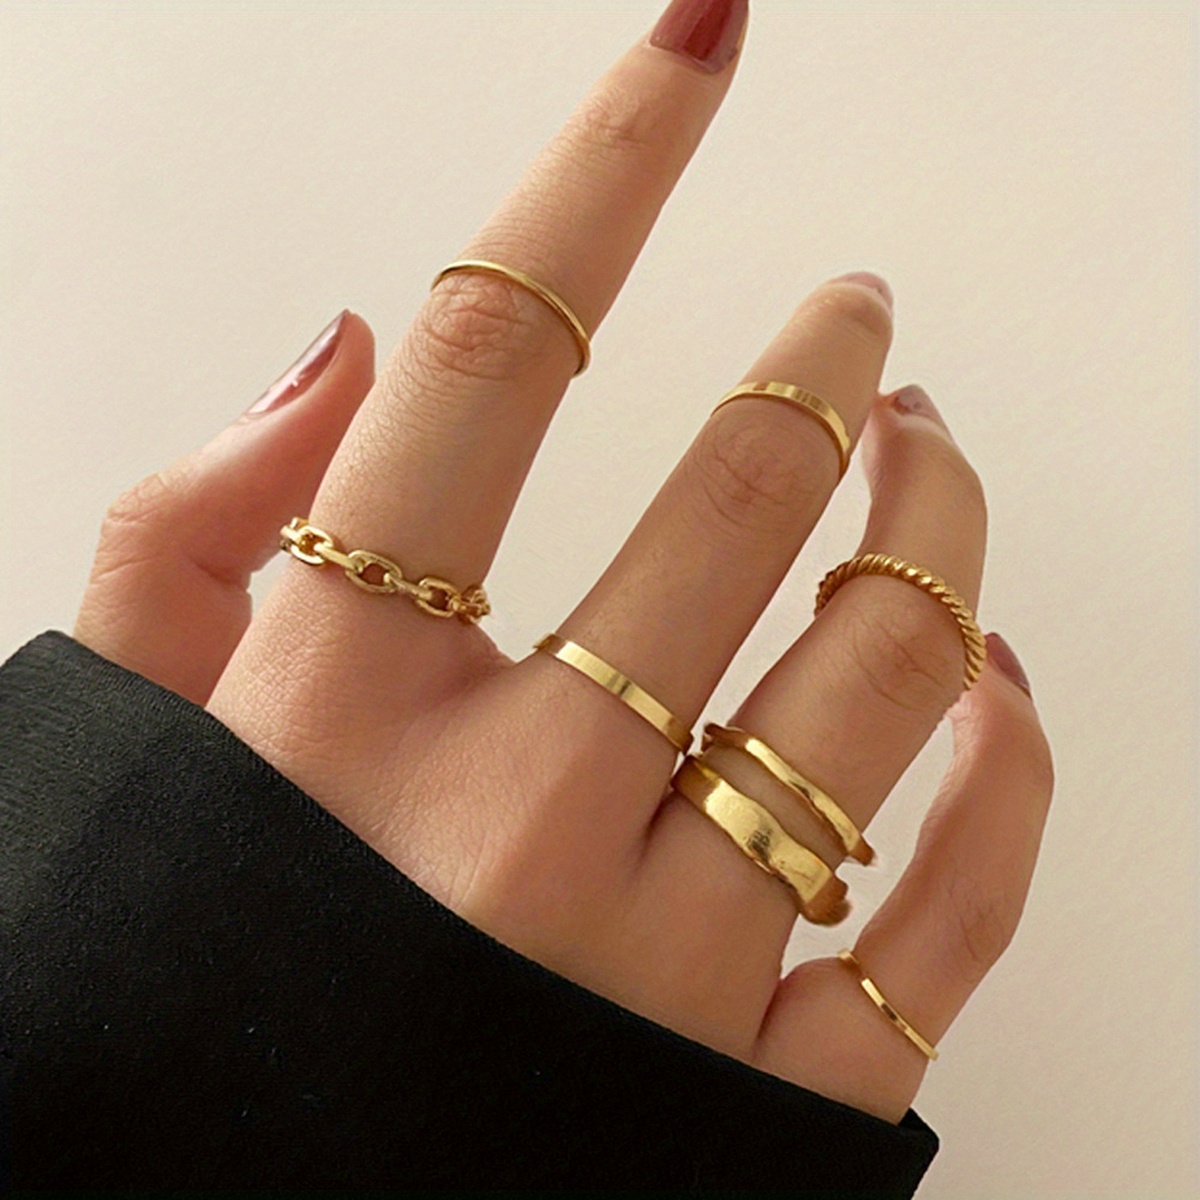 11 PCS Set Stacking Rings Band Finger Knuckle Fashion Jewelry Gold